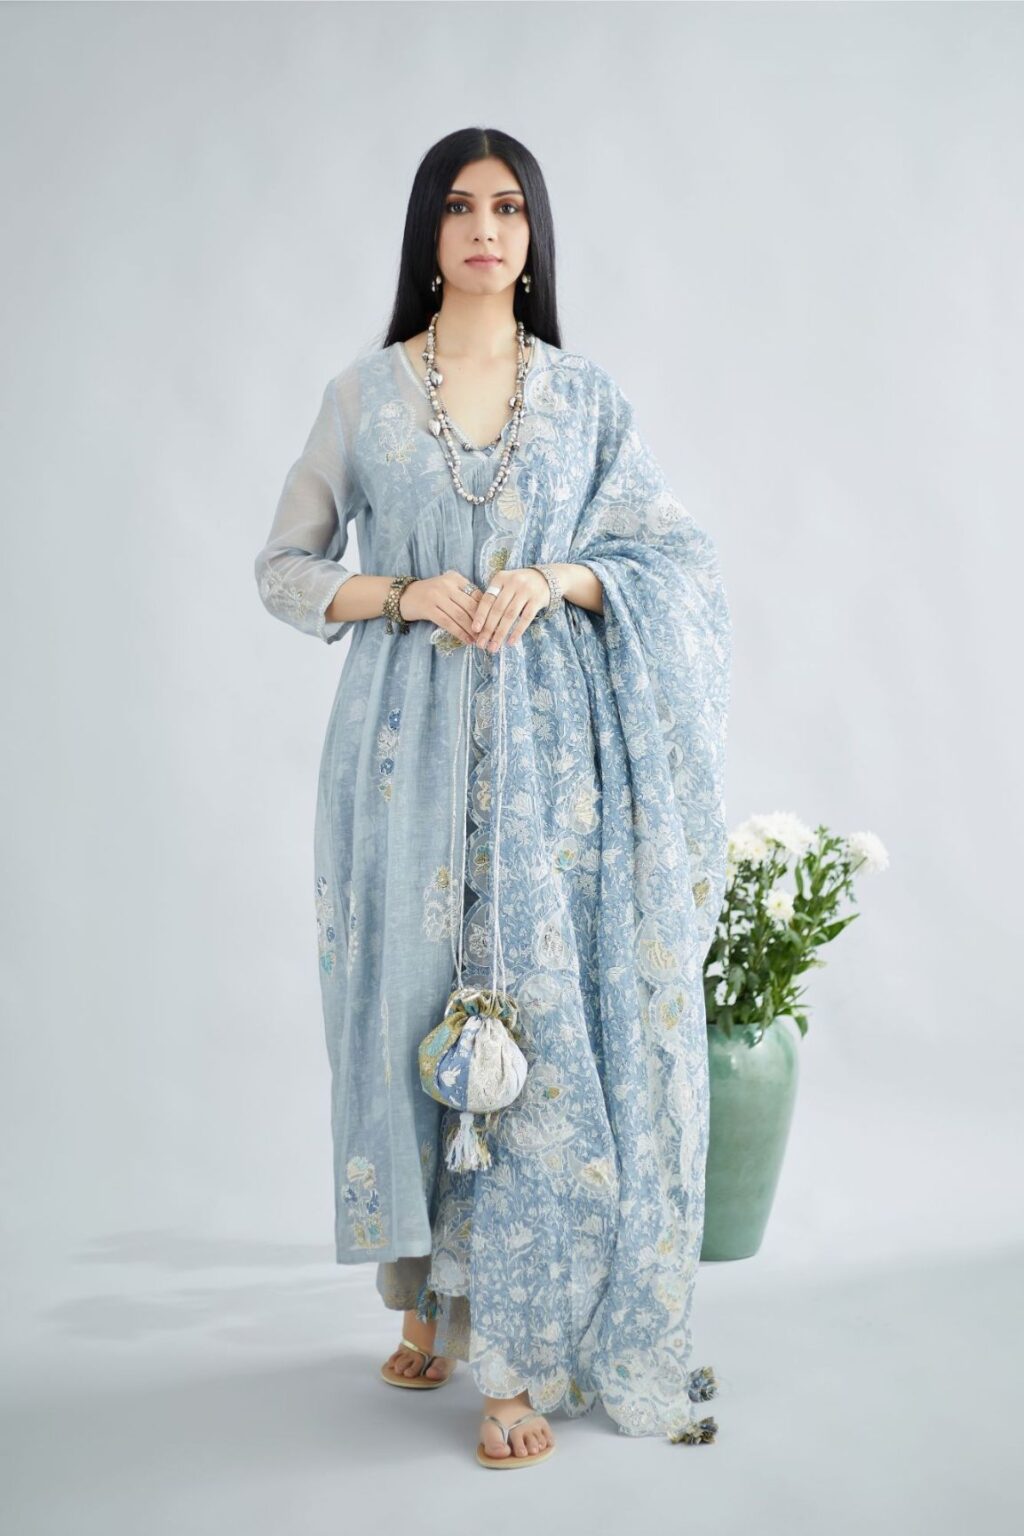 Blue hand block printed Cotton Chanderi dupatta with cut work embroidery, highlighted with sequin hand work and silver zari embroidery